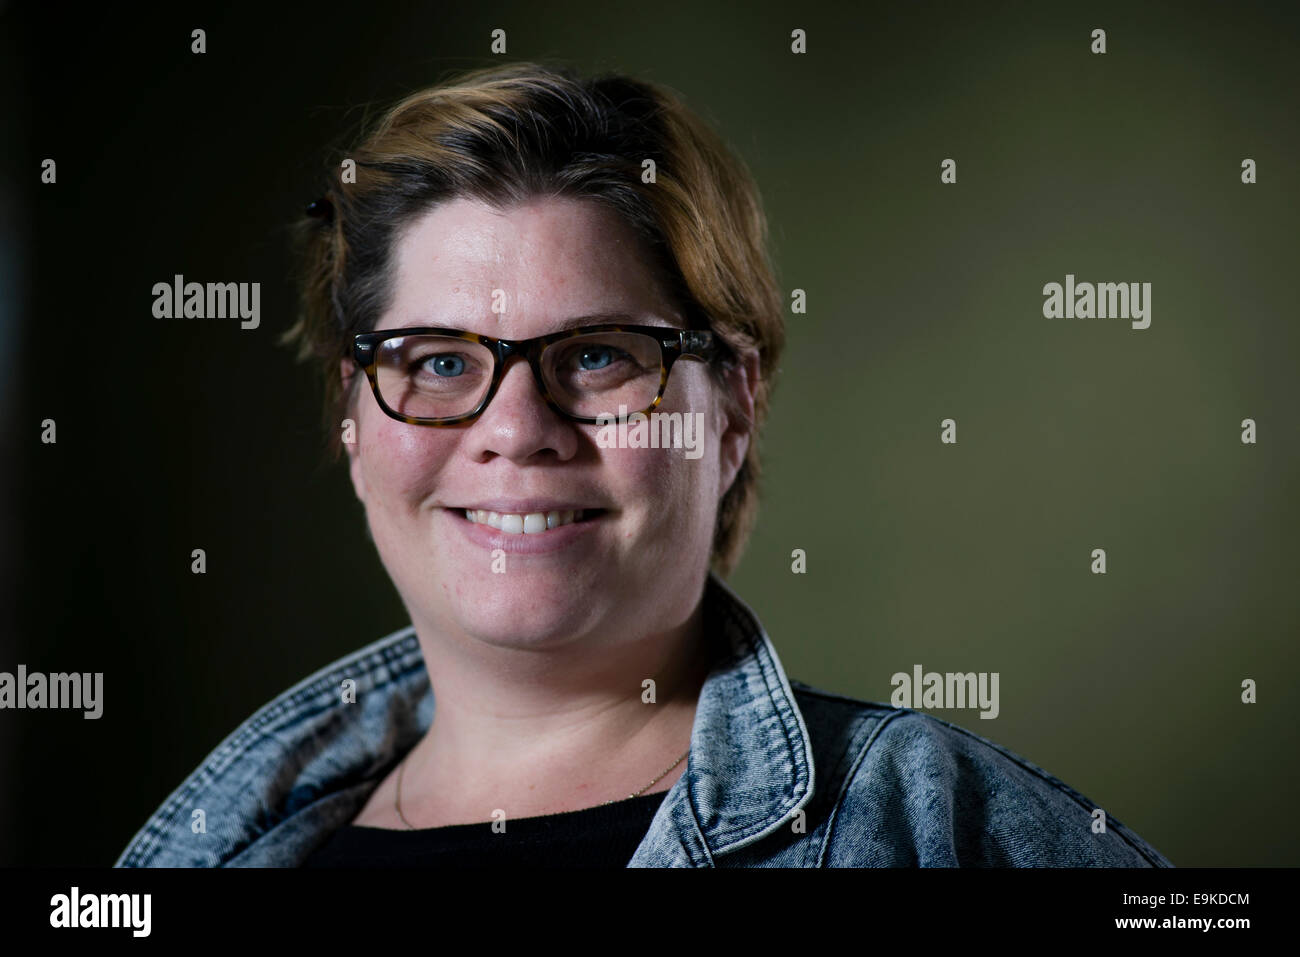 English actress, comedian and writer Katy Brand appears at the Edinburgh International Book Festival. Stock Photo